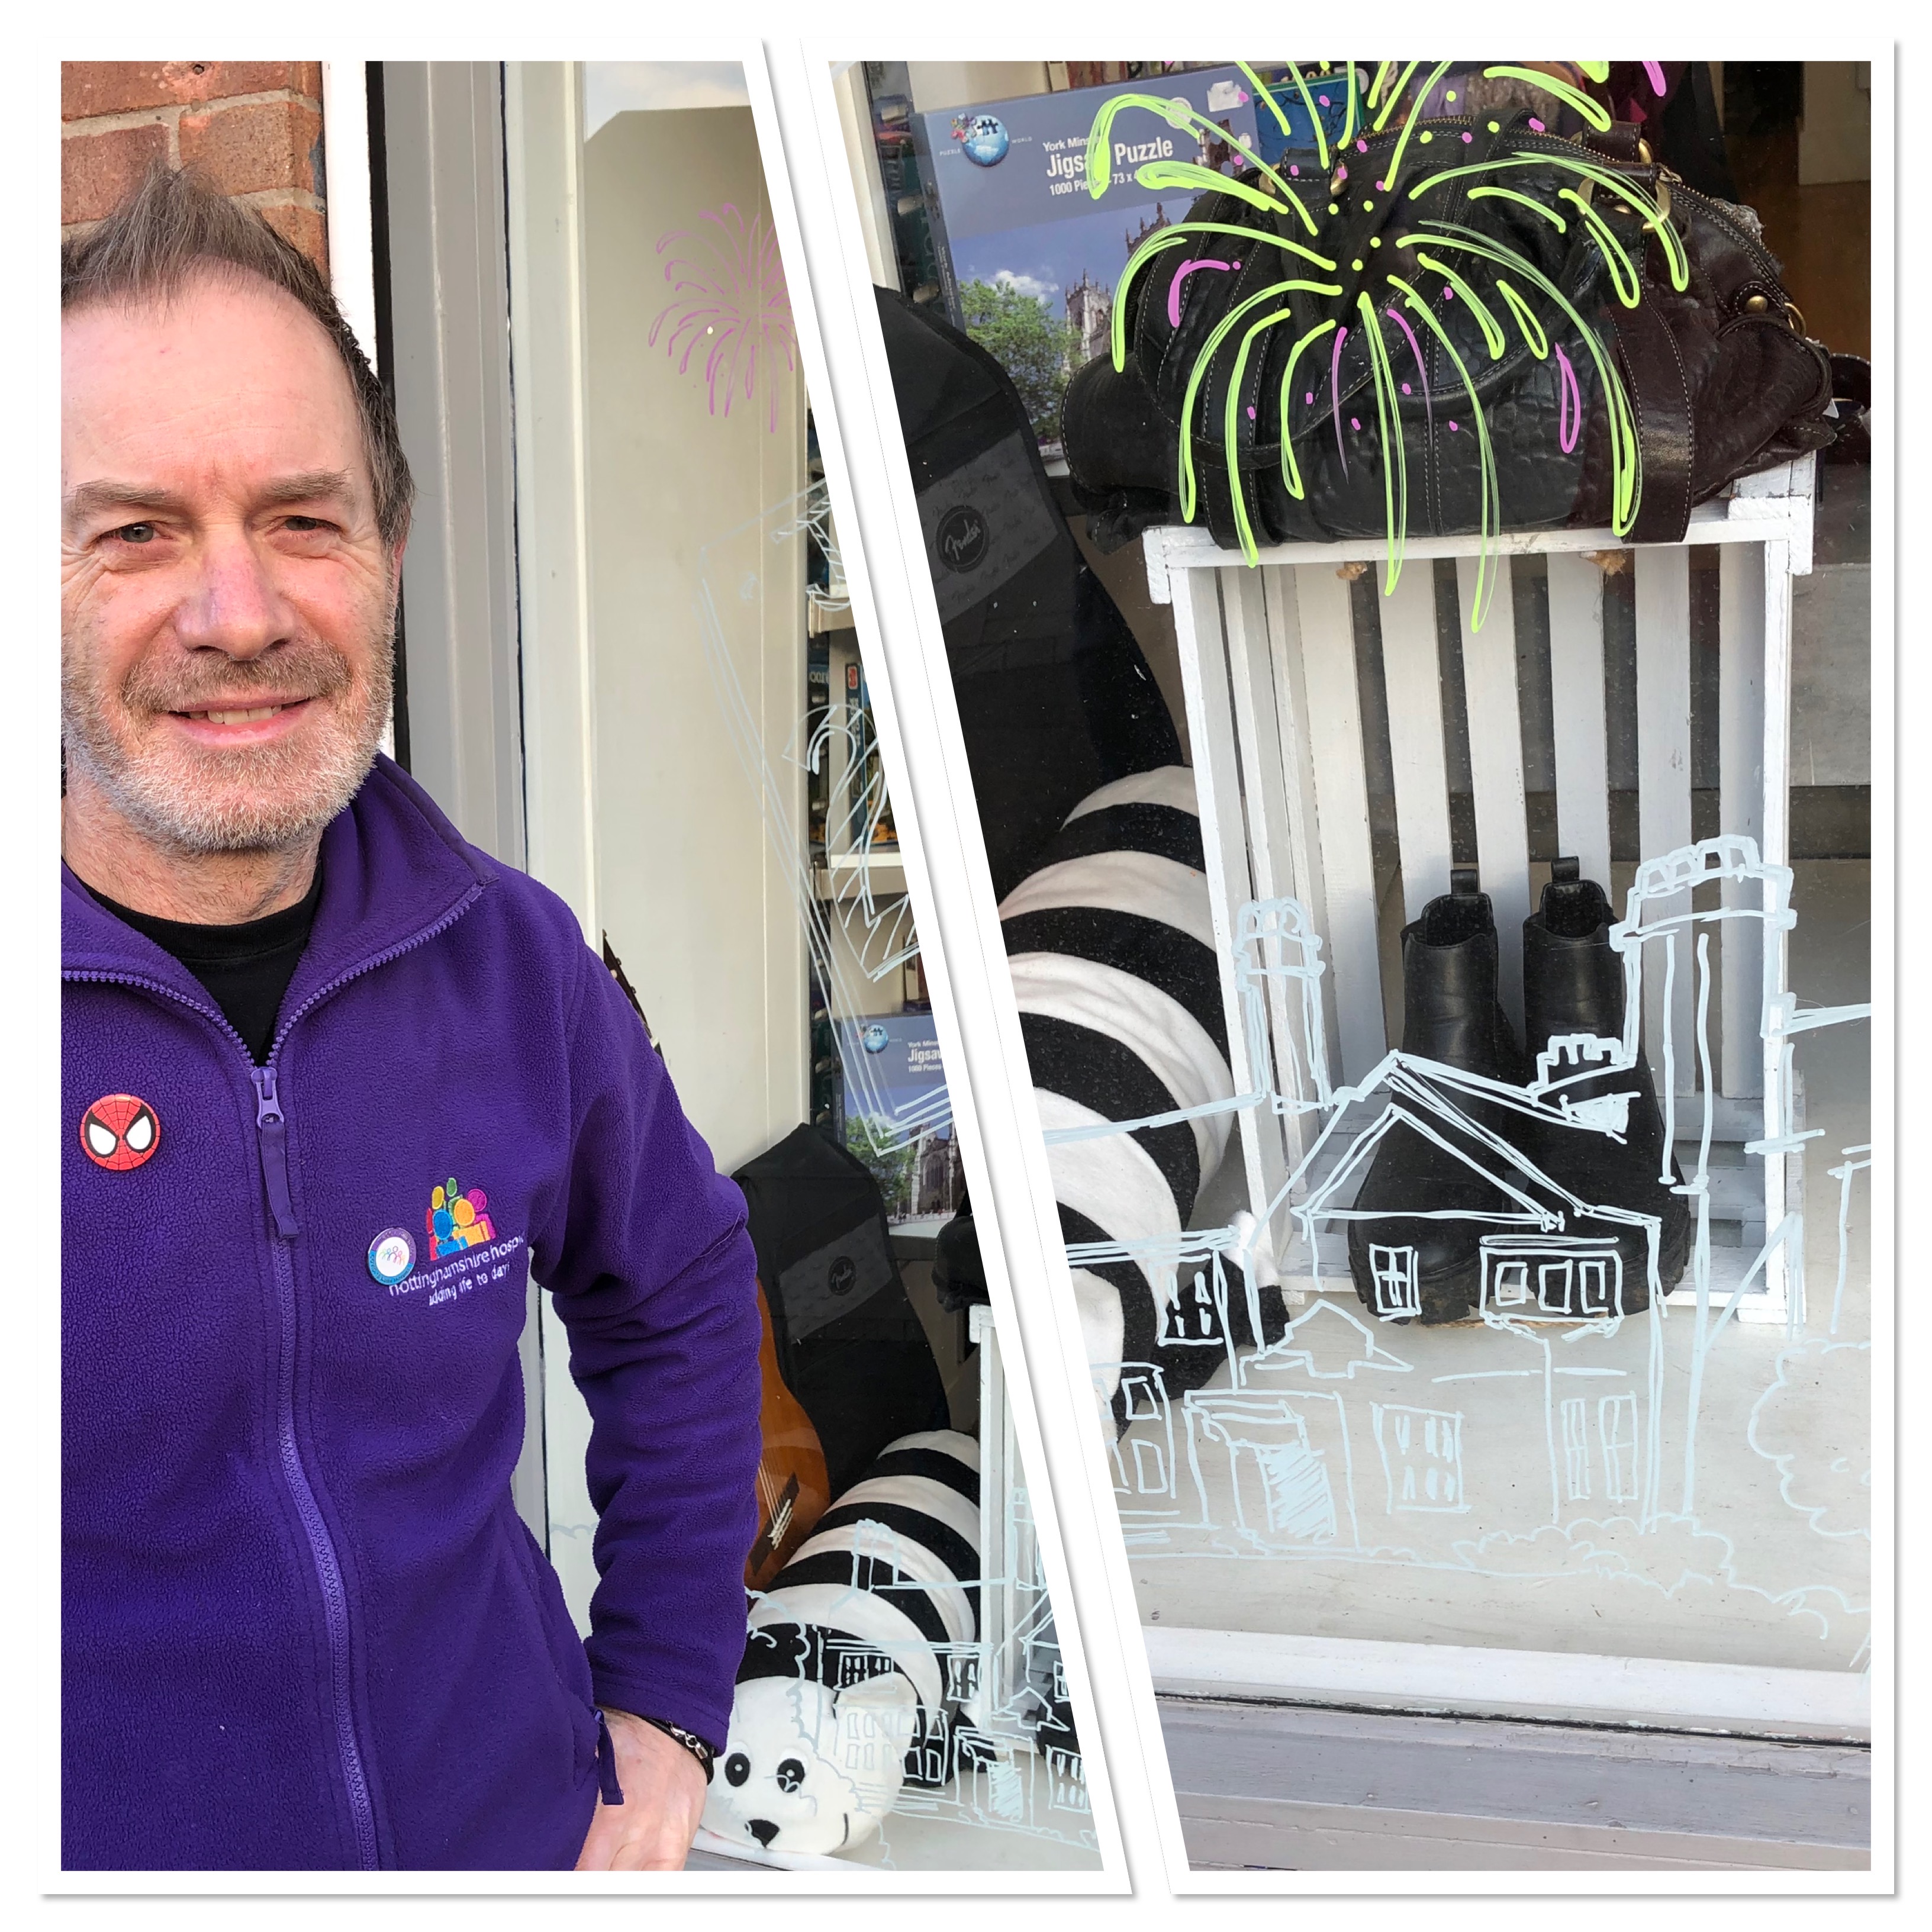 Shop manager Mark with window painting